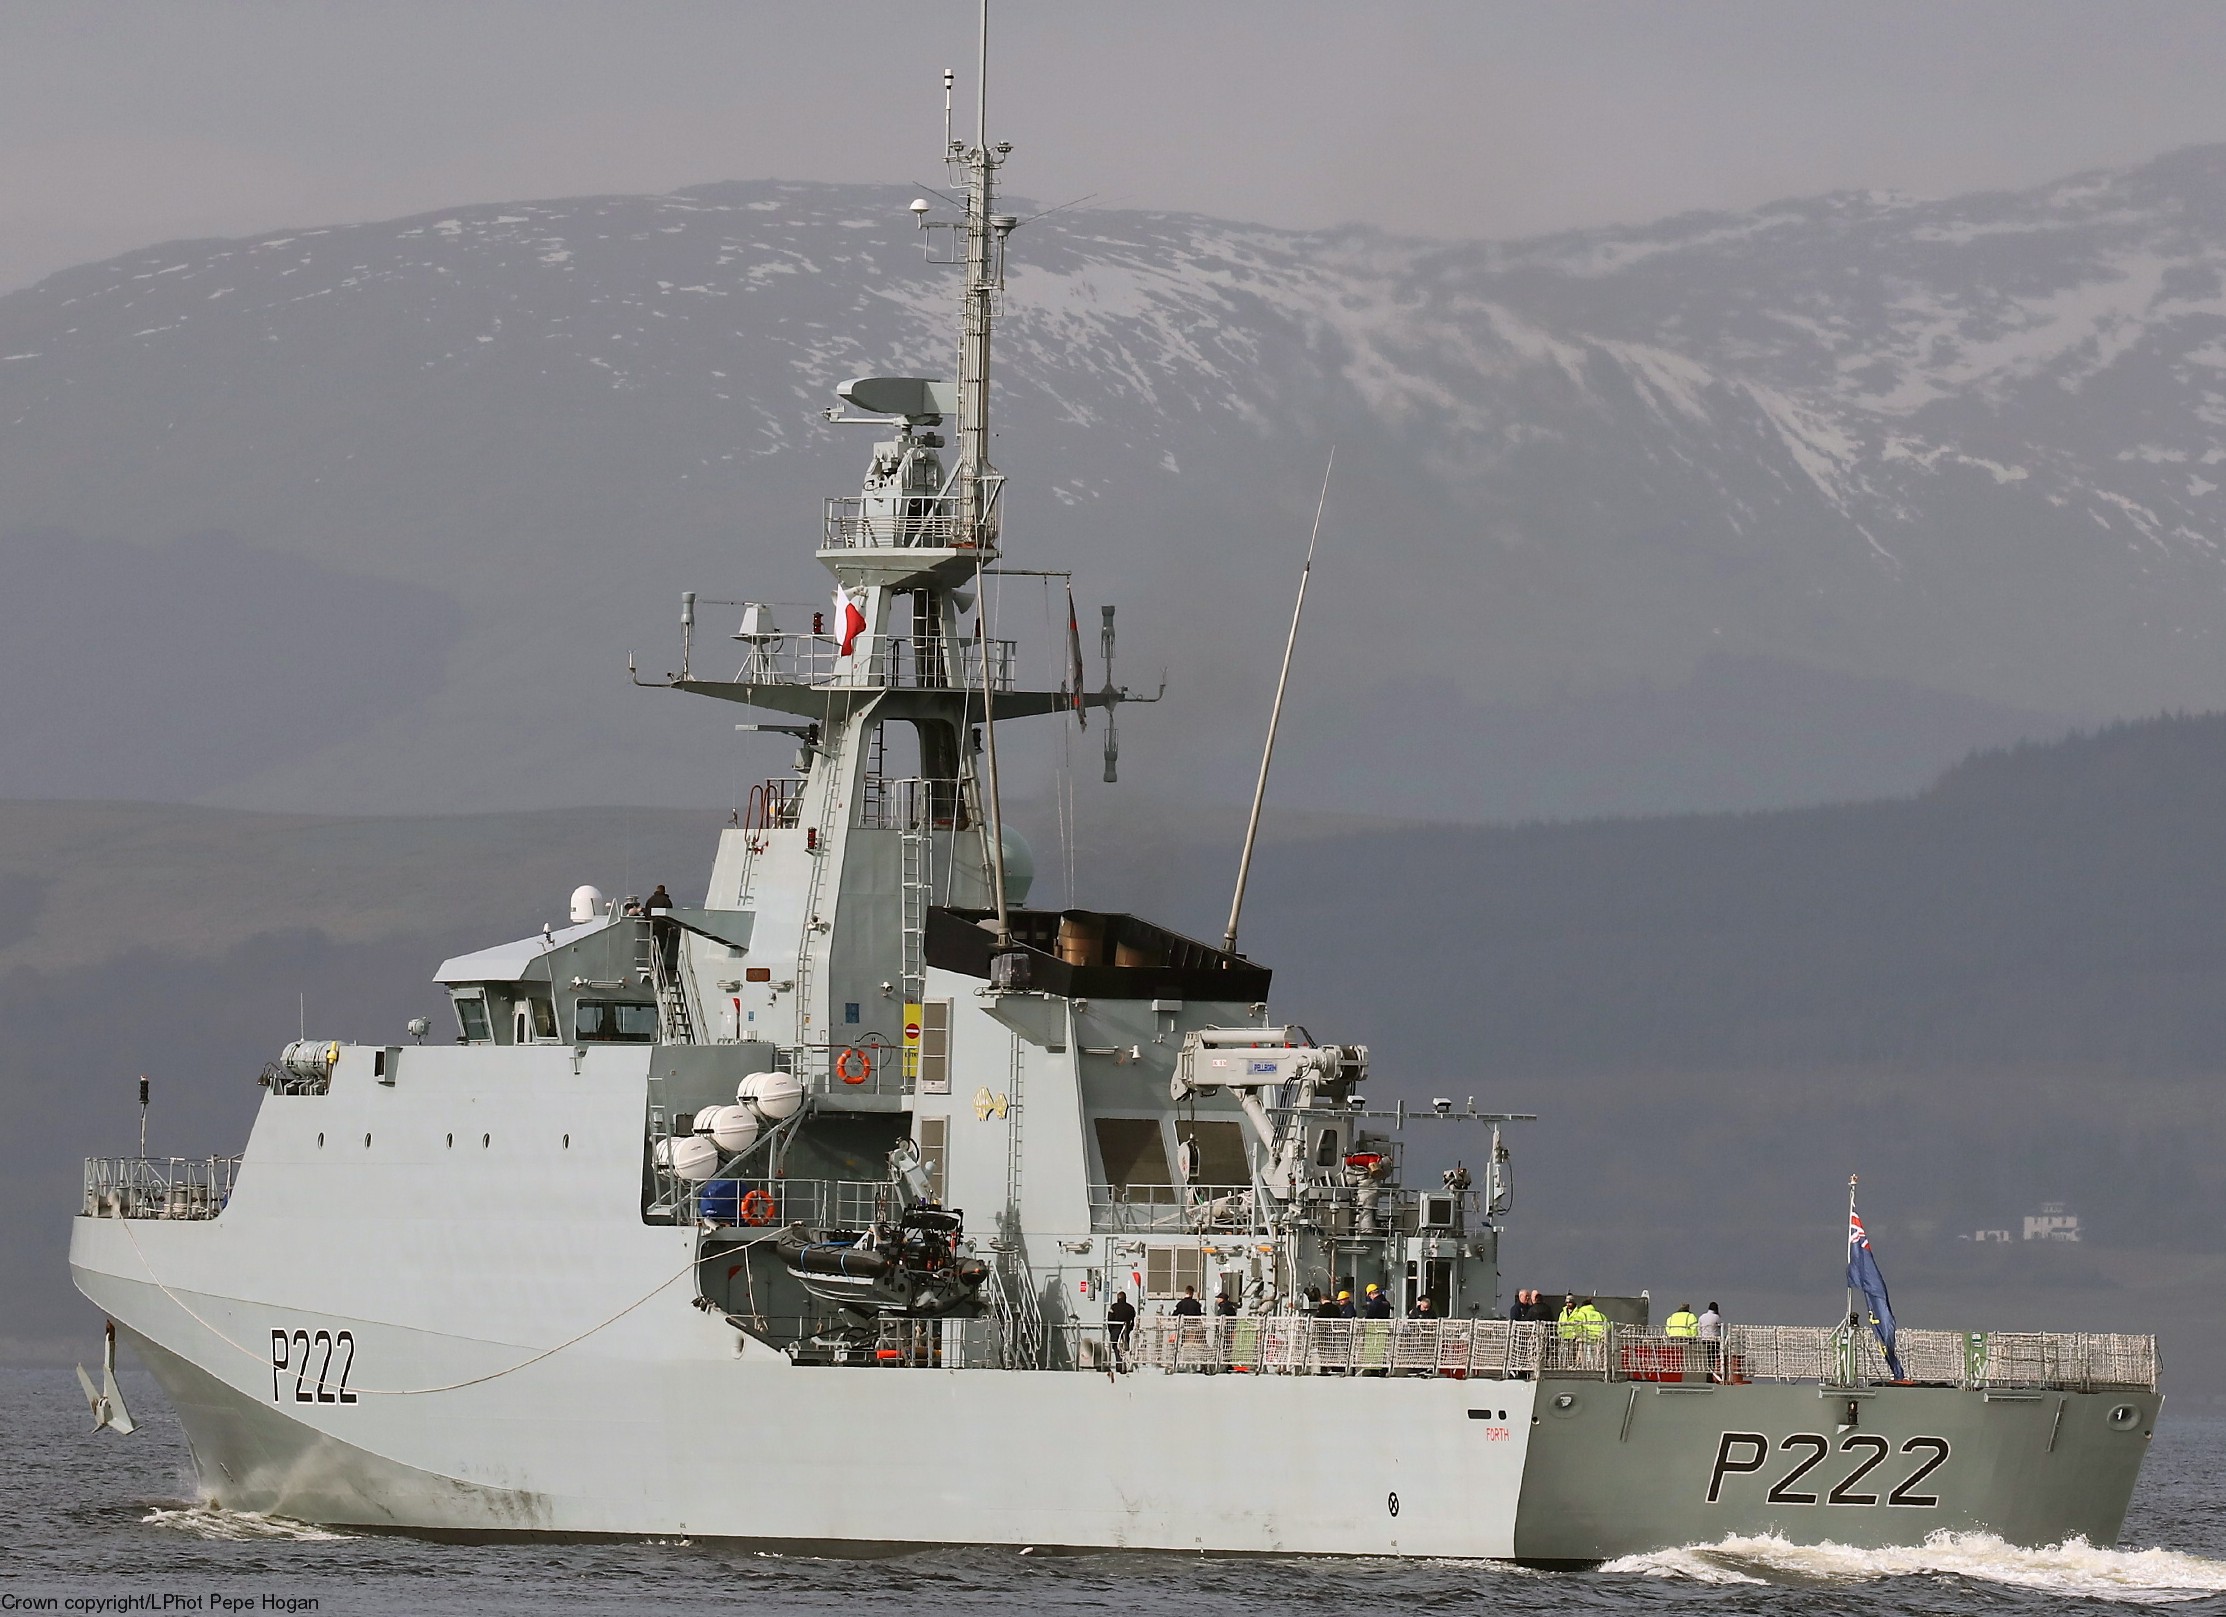 p222 hms forth river class offshore patrol vessel opv royal navy 53